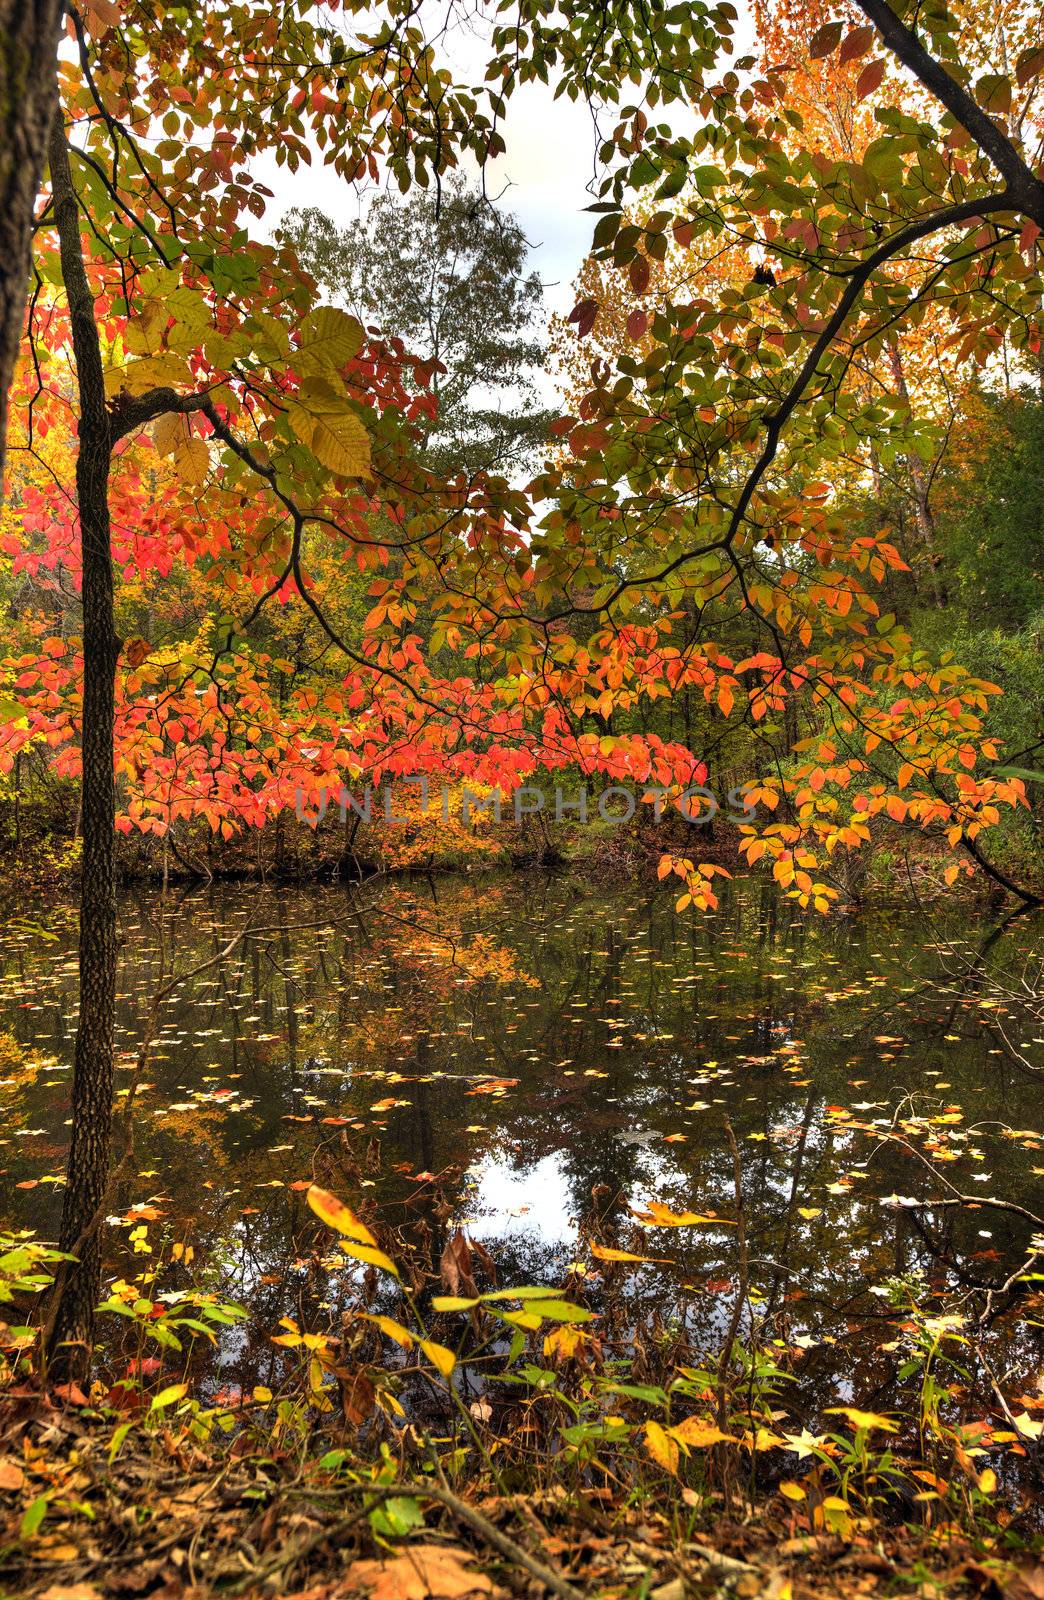 Fall leaves shine over a pond on an Arkansas trail.